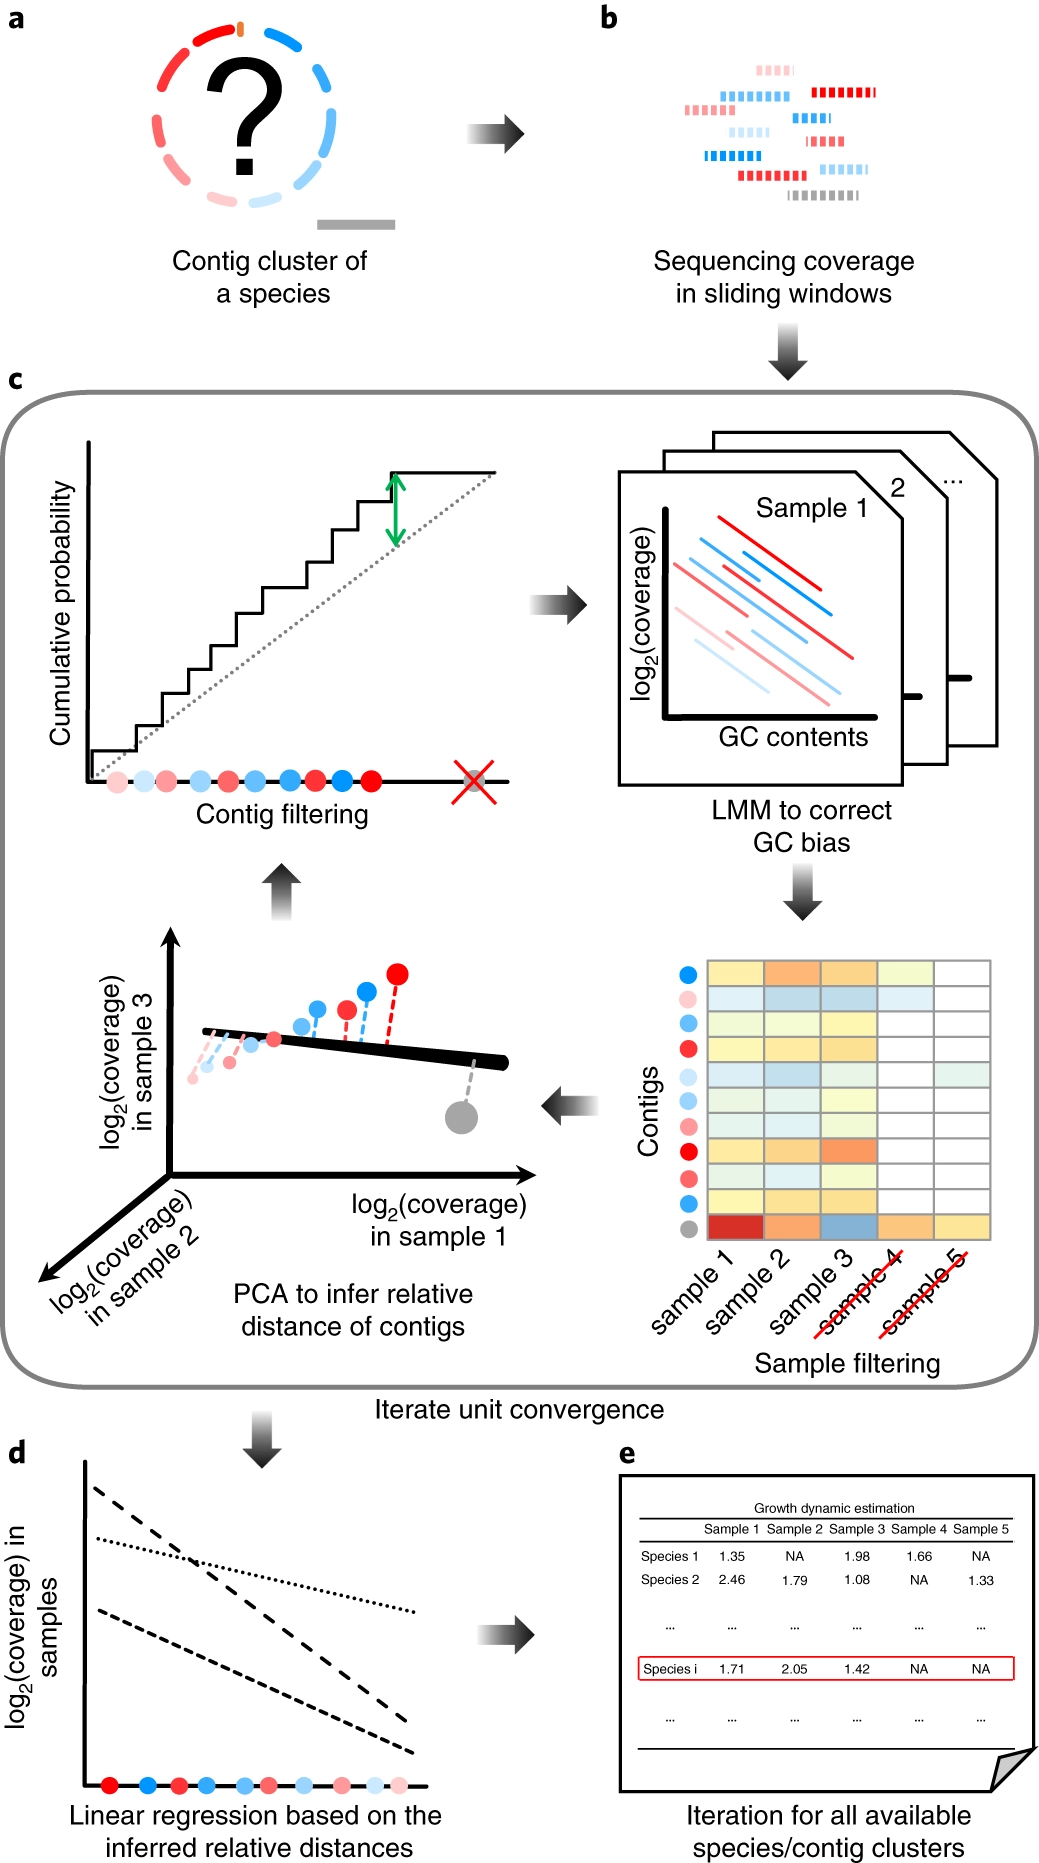 Quantifying and comparing bacterial growth dynamics in multiple metagenomic samples